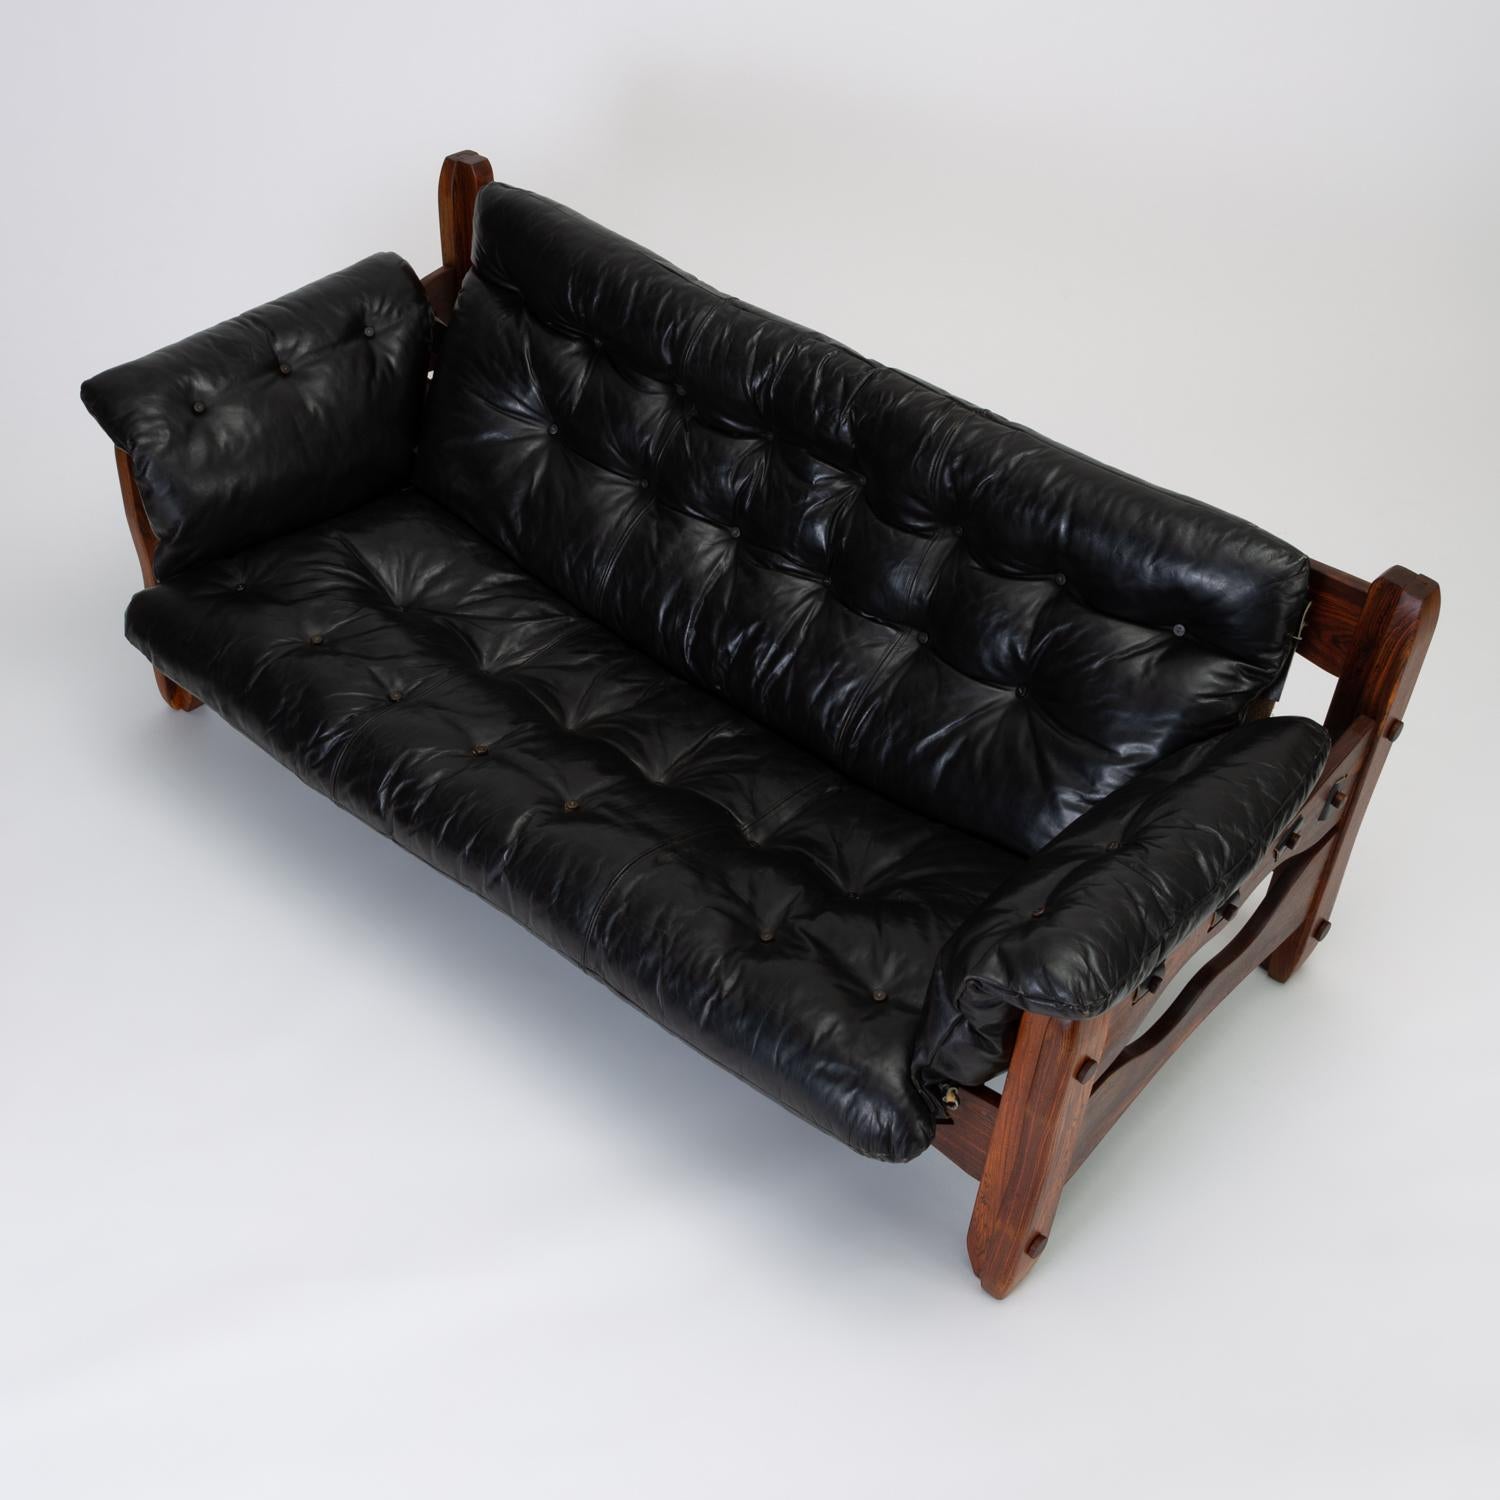 Descanso Sofa by Don Shoemaker for Señal in Cueramo and Leather 7